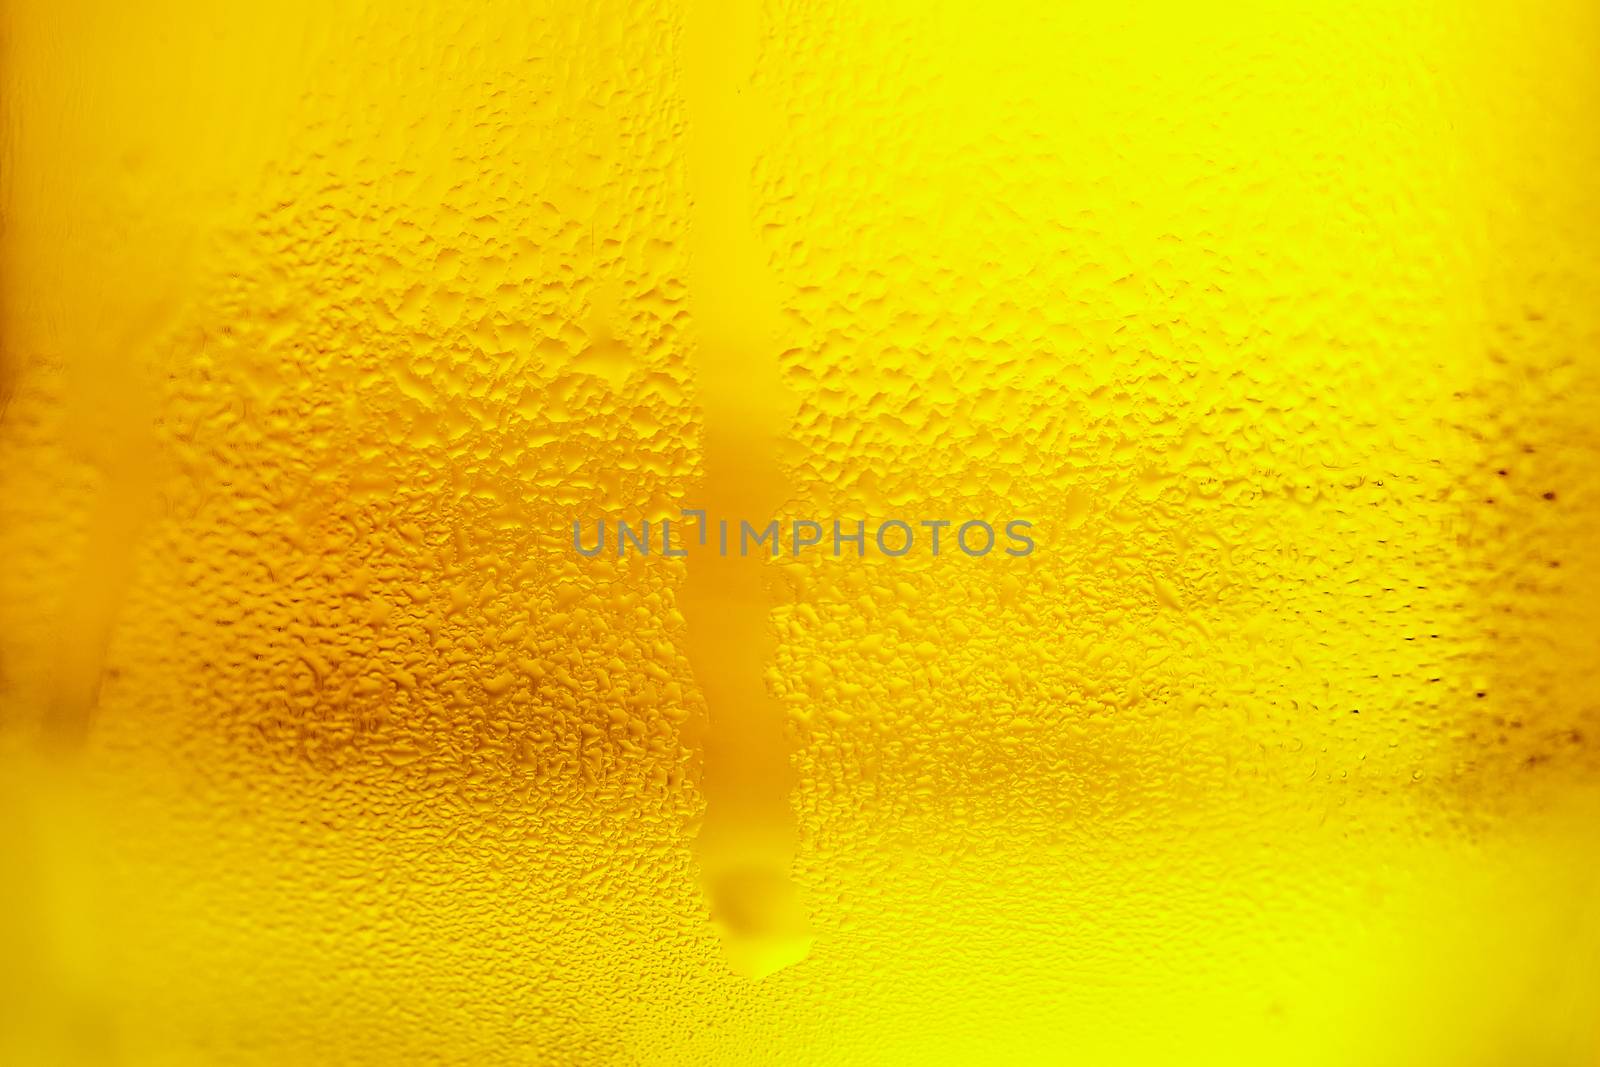 misted glass of cold drink, close-up